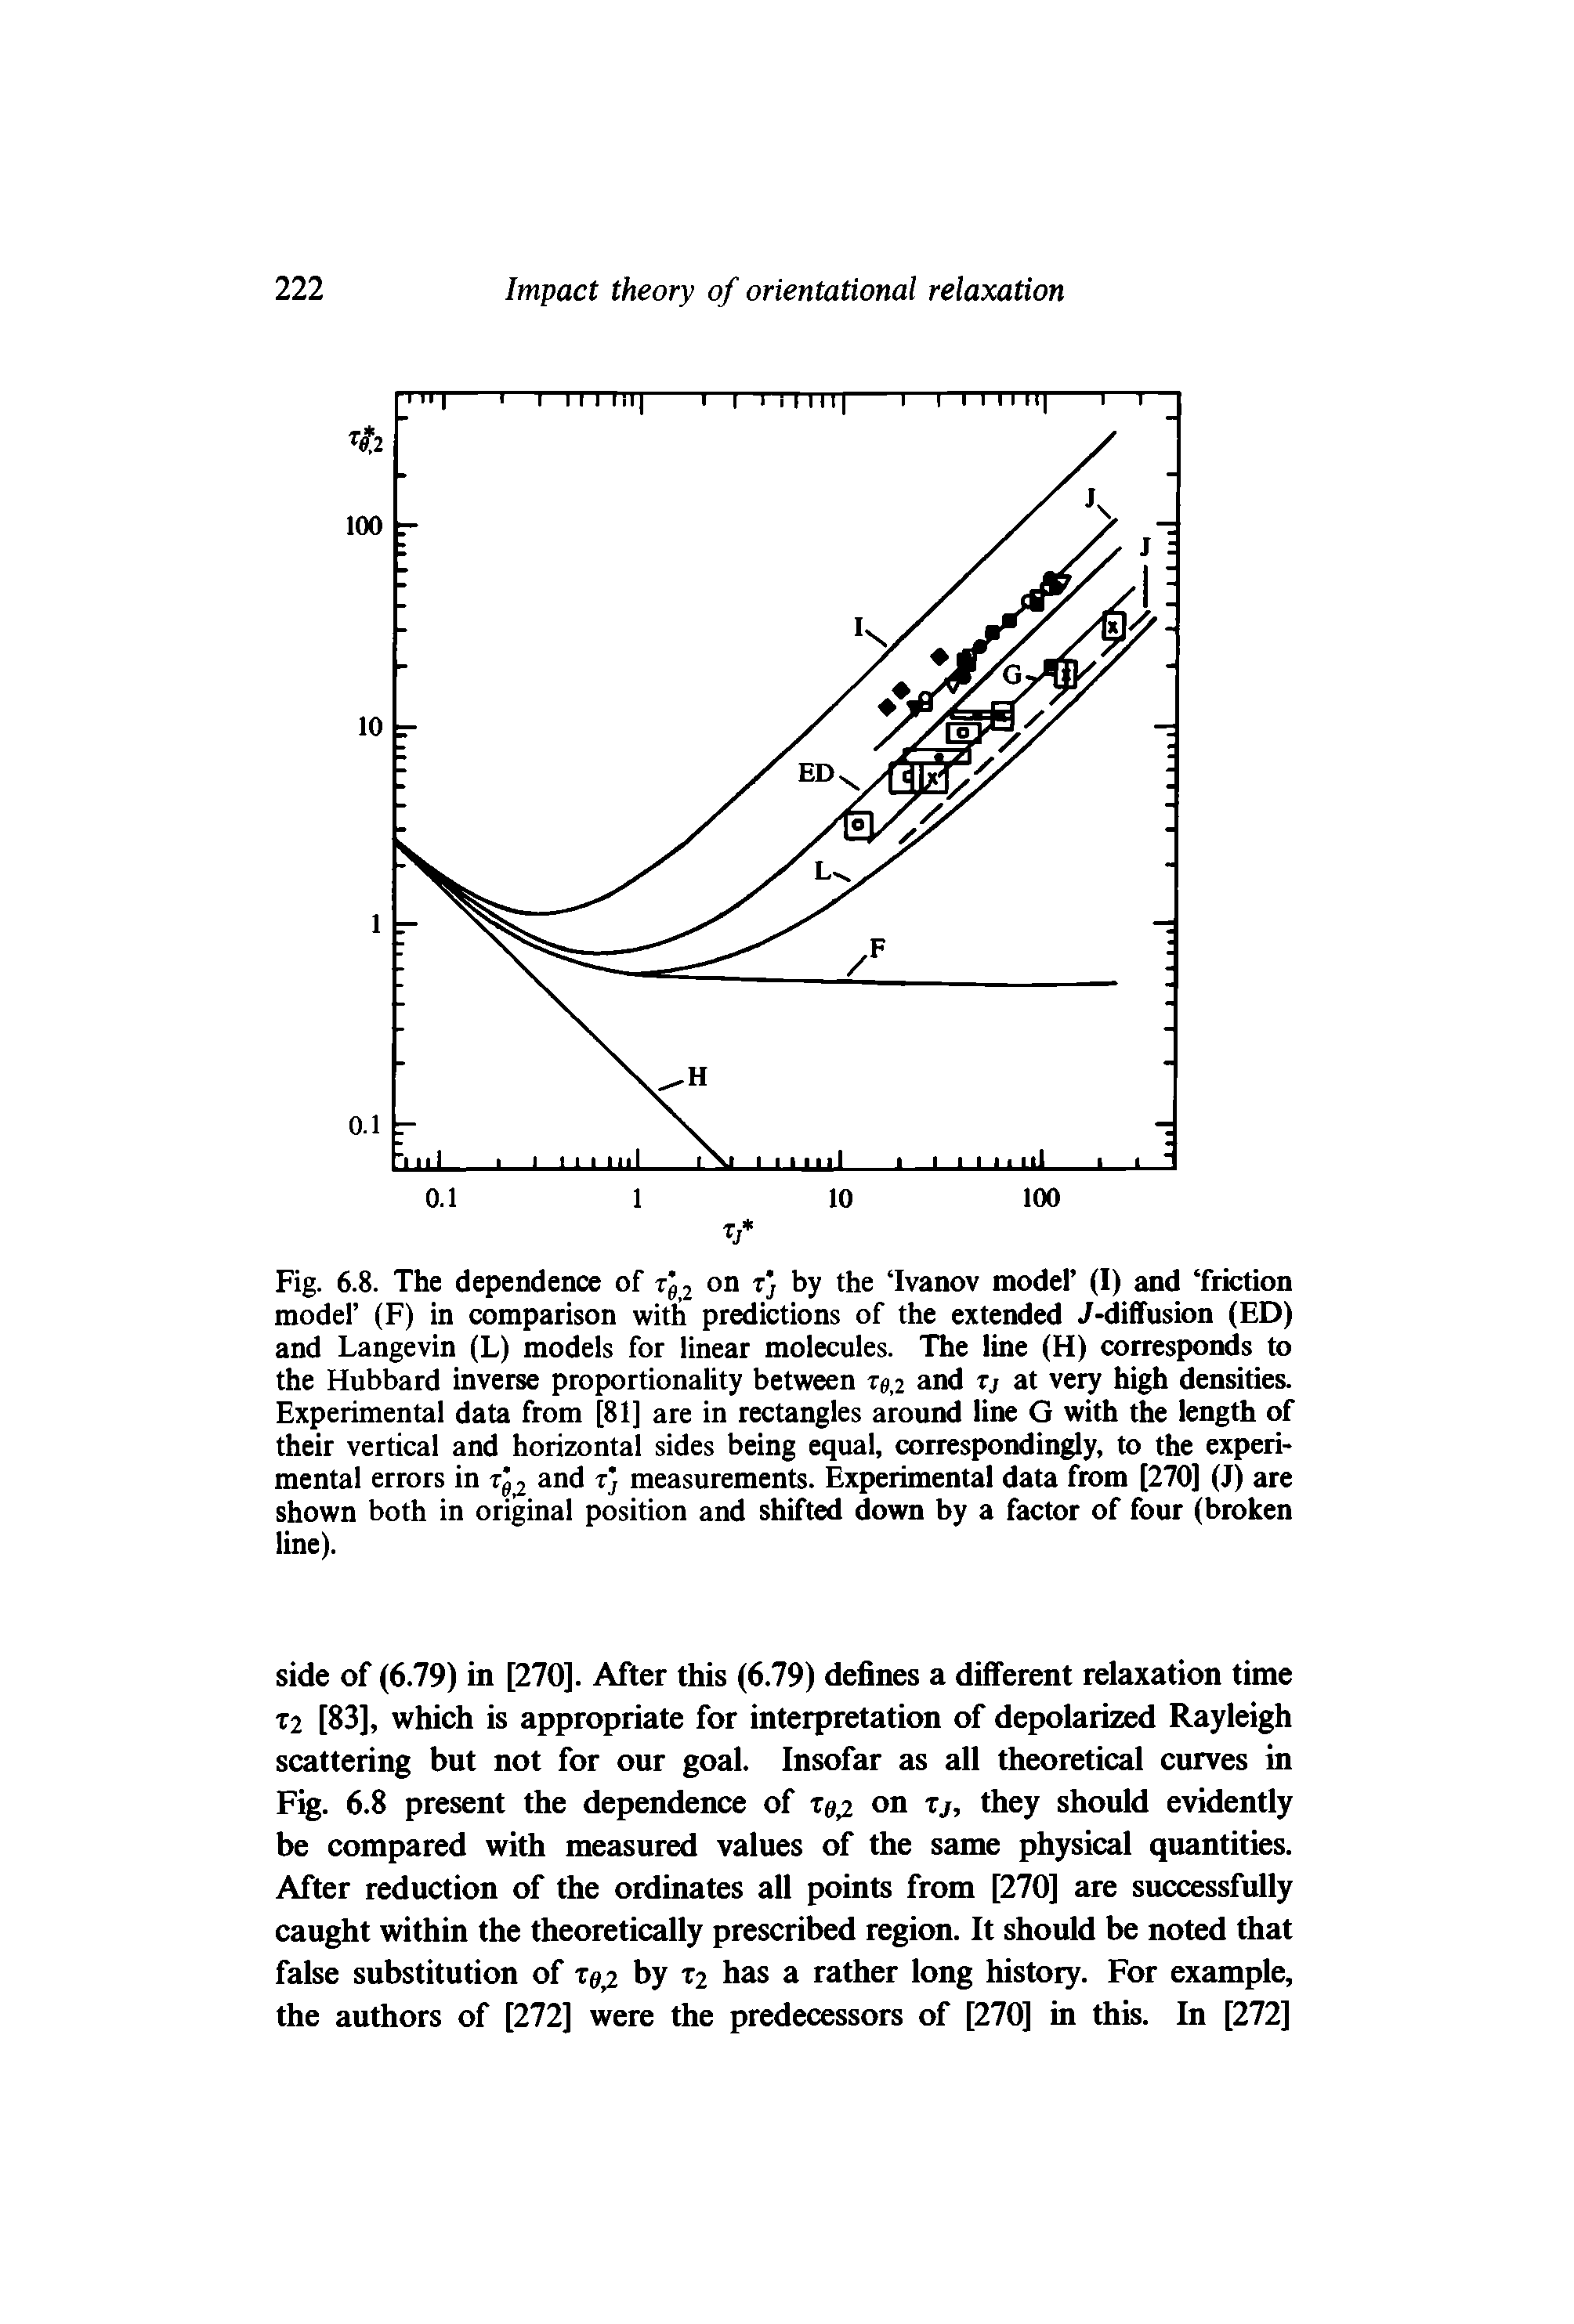 Fig. 6.8. The dependence of rj2 on x) by the Ivanov model (I) and friction model (F) in comparison with predictions of the extended. /-diffusion (ED) and Langevin (L) models for linear molecules. The line (H) corresponds to the Hubbard inverse proportionality between xgj and xj at very high densities. Experimental data from [81] are in rectangles around line G with the length of their vertical and horizontal sides being equal, correspondingly, to the experimental errors in x el and rj measurements. Experimental data from [270] (J) are shown both in original position and shifted down by a factor of four (broken line).